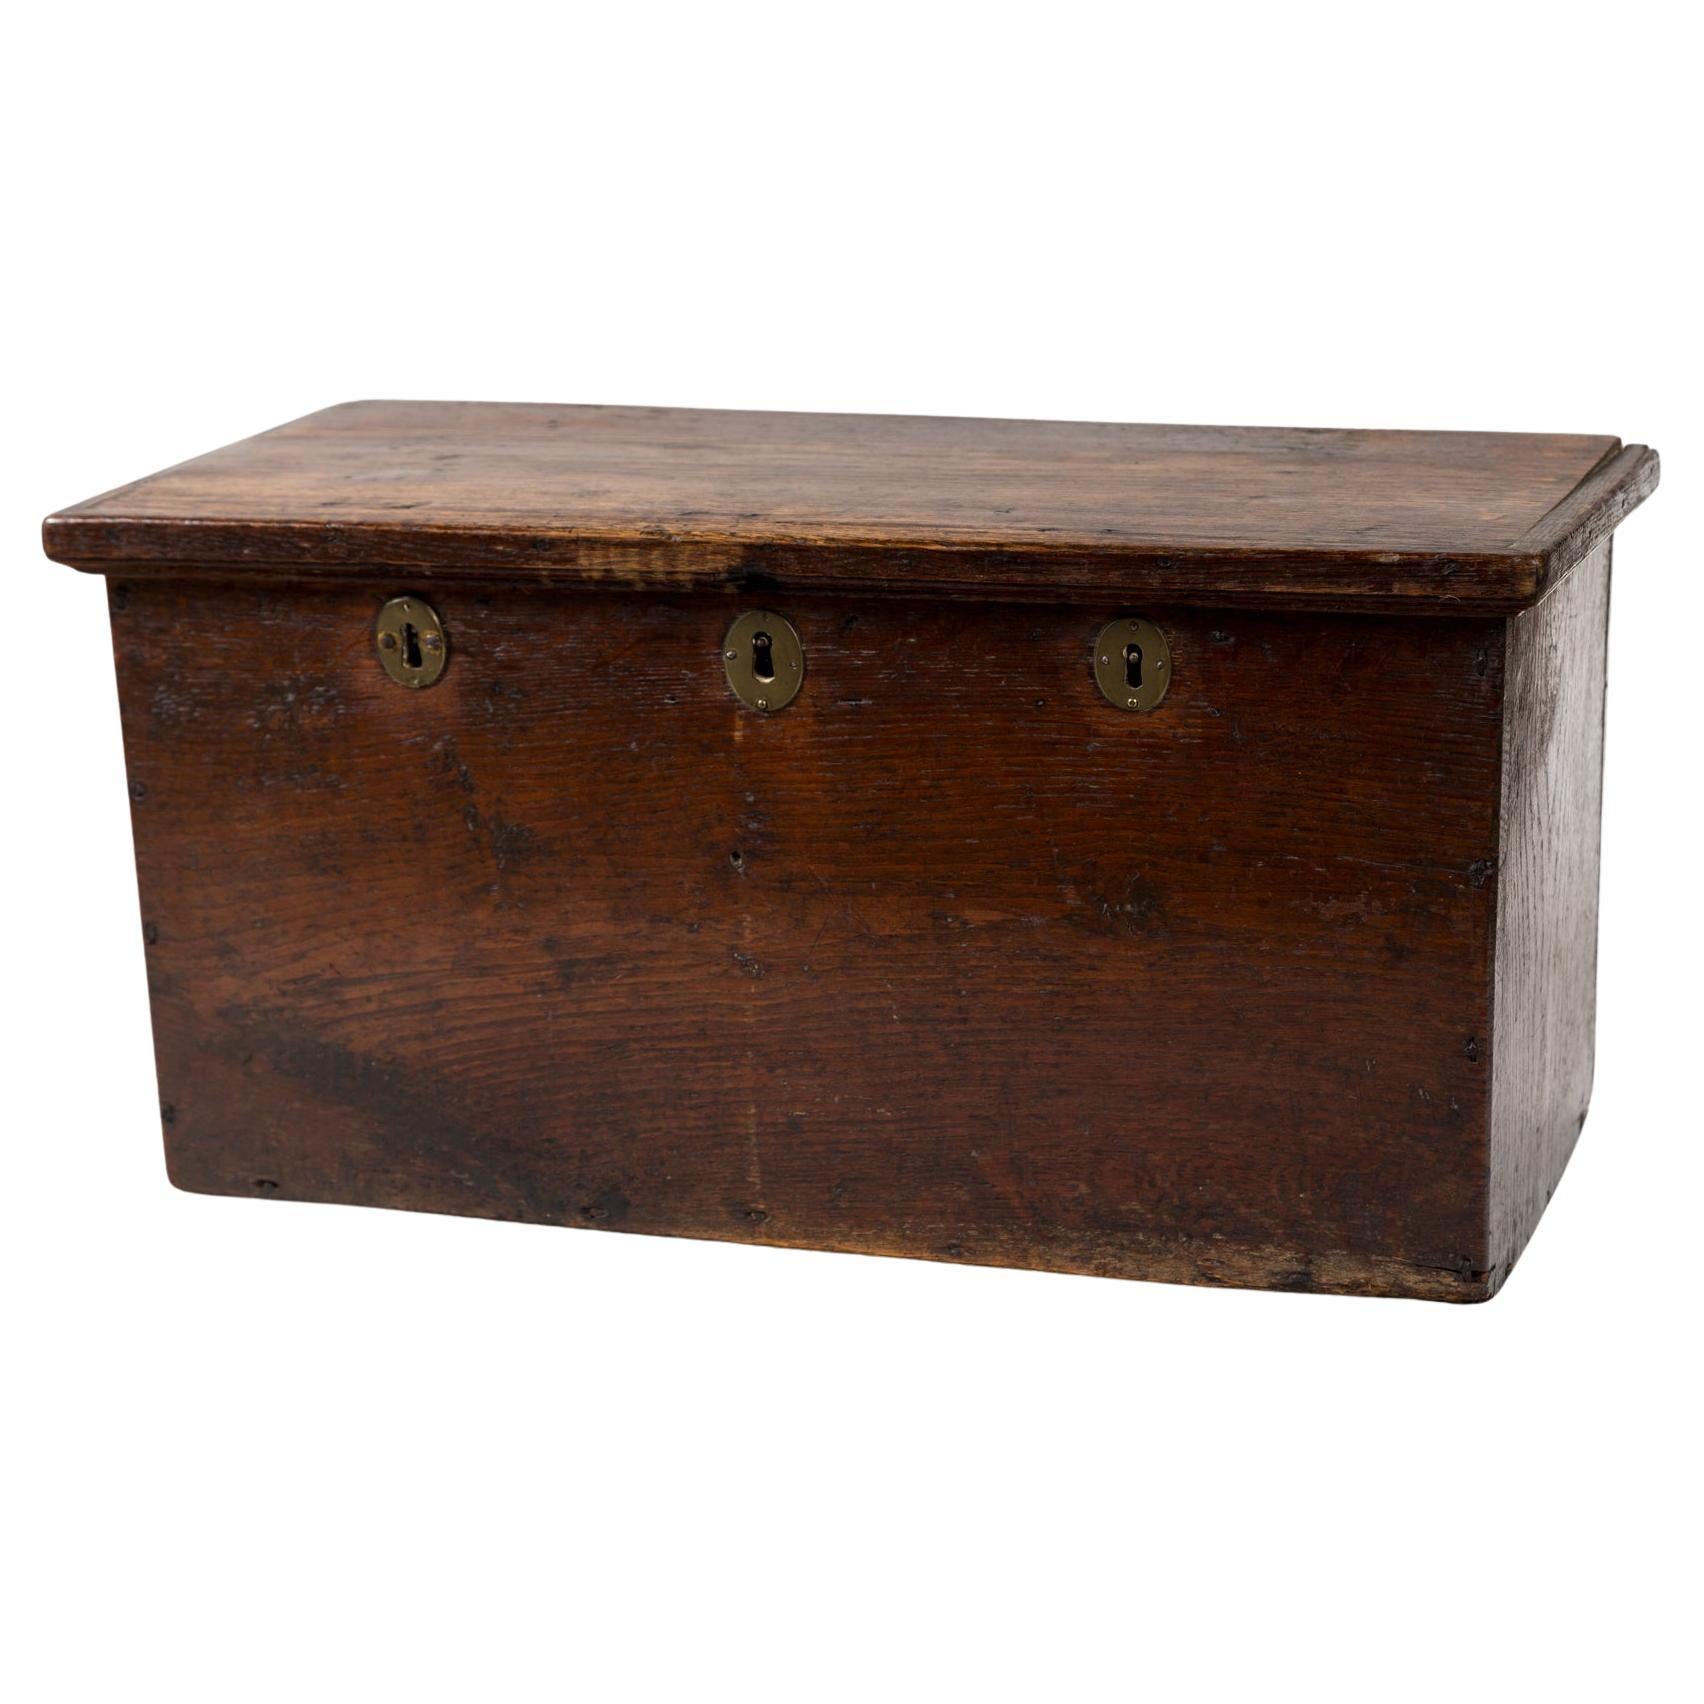 European Walnut Storage Chest, Early 19th Century For Sale